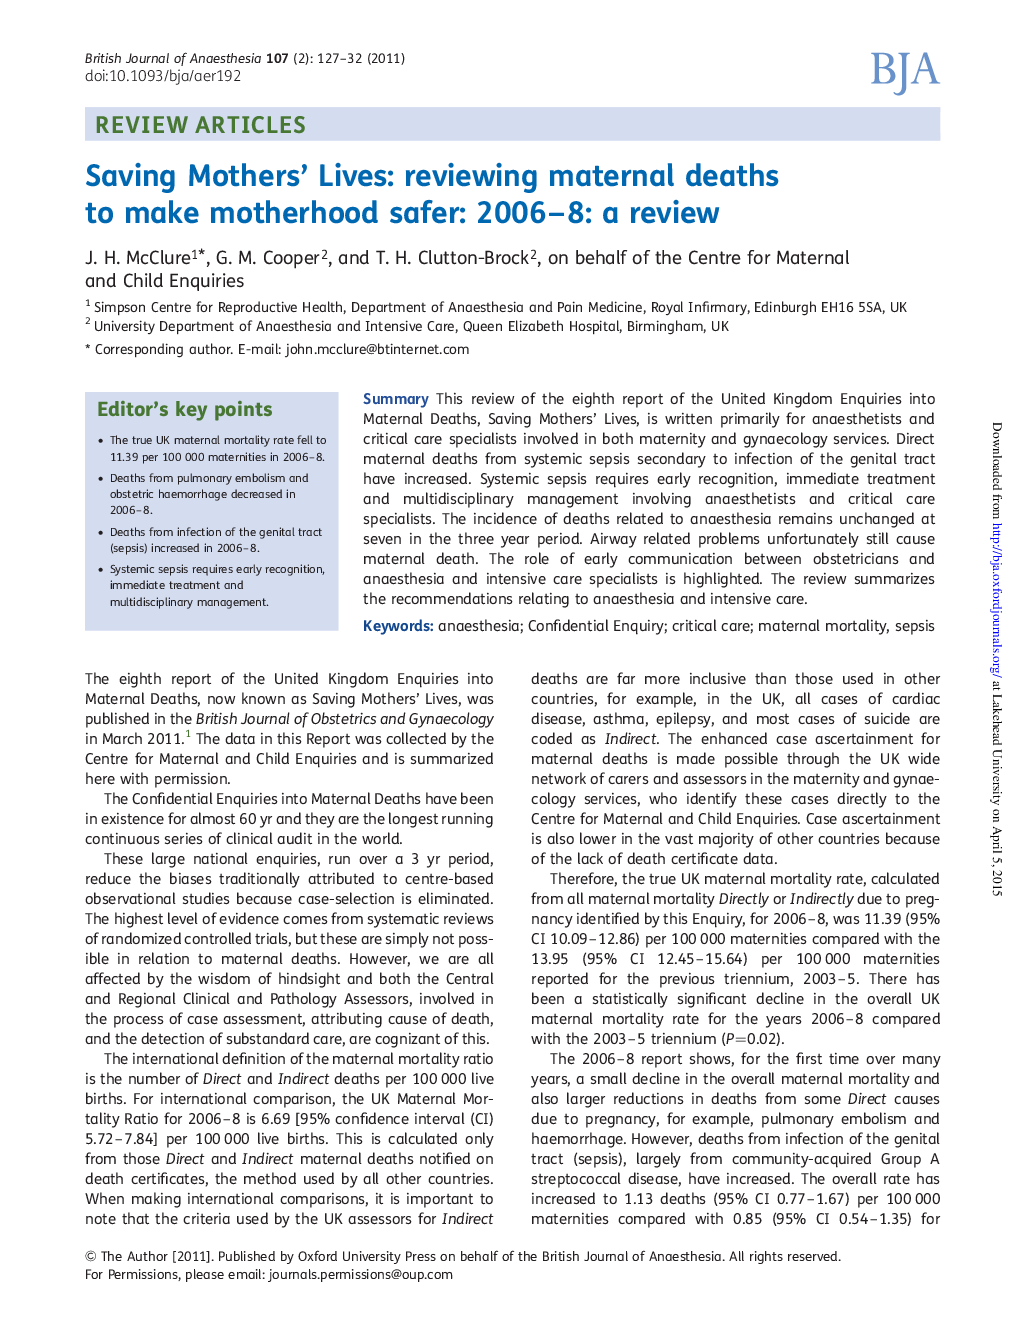 Saving Mothers' Lives: reviewing maternal deaths to make motherhood safer: 2006-8: a review